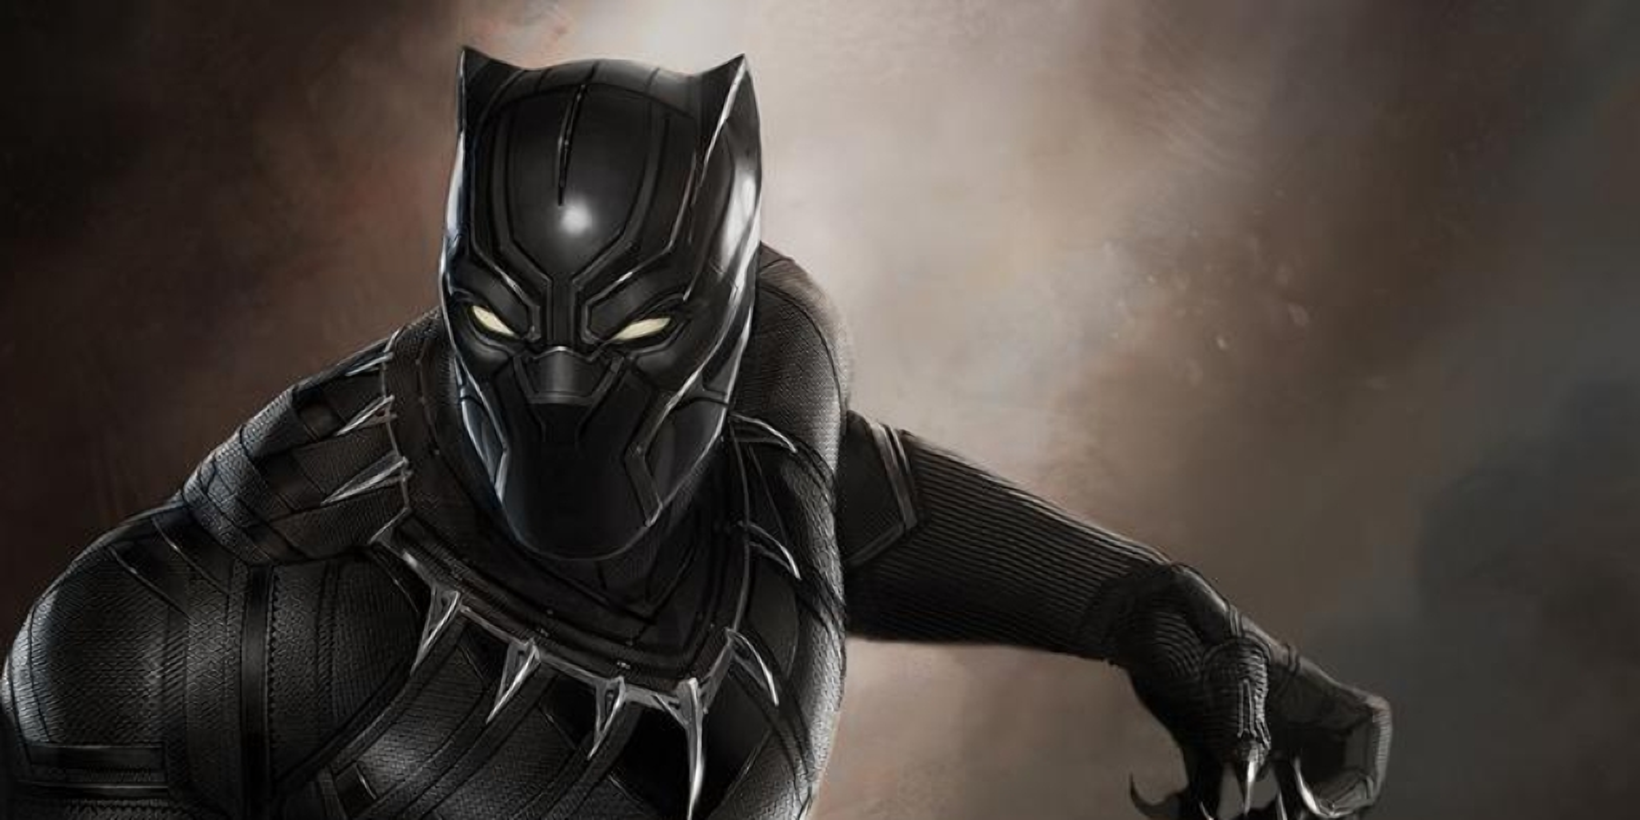 Black Panther: Marvel Studios' drops newest, official movie trailer